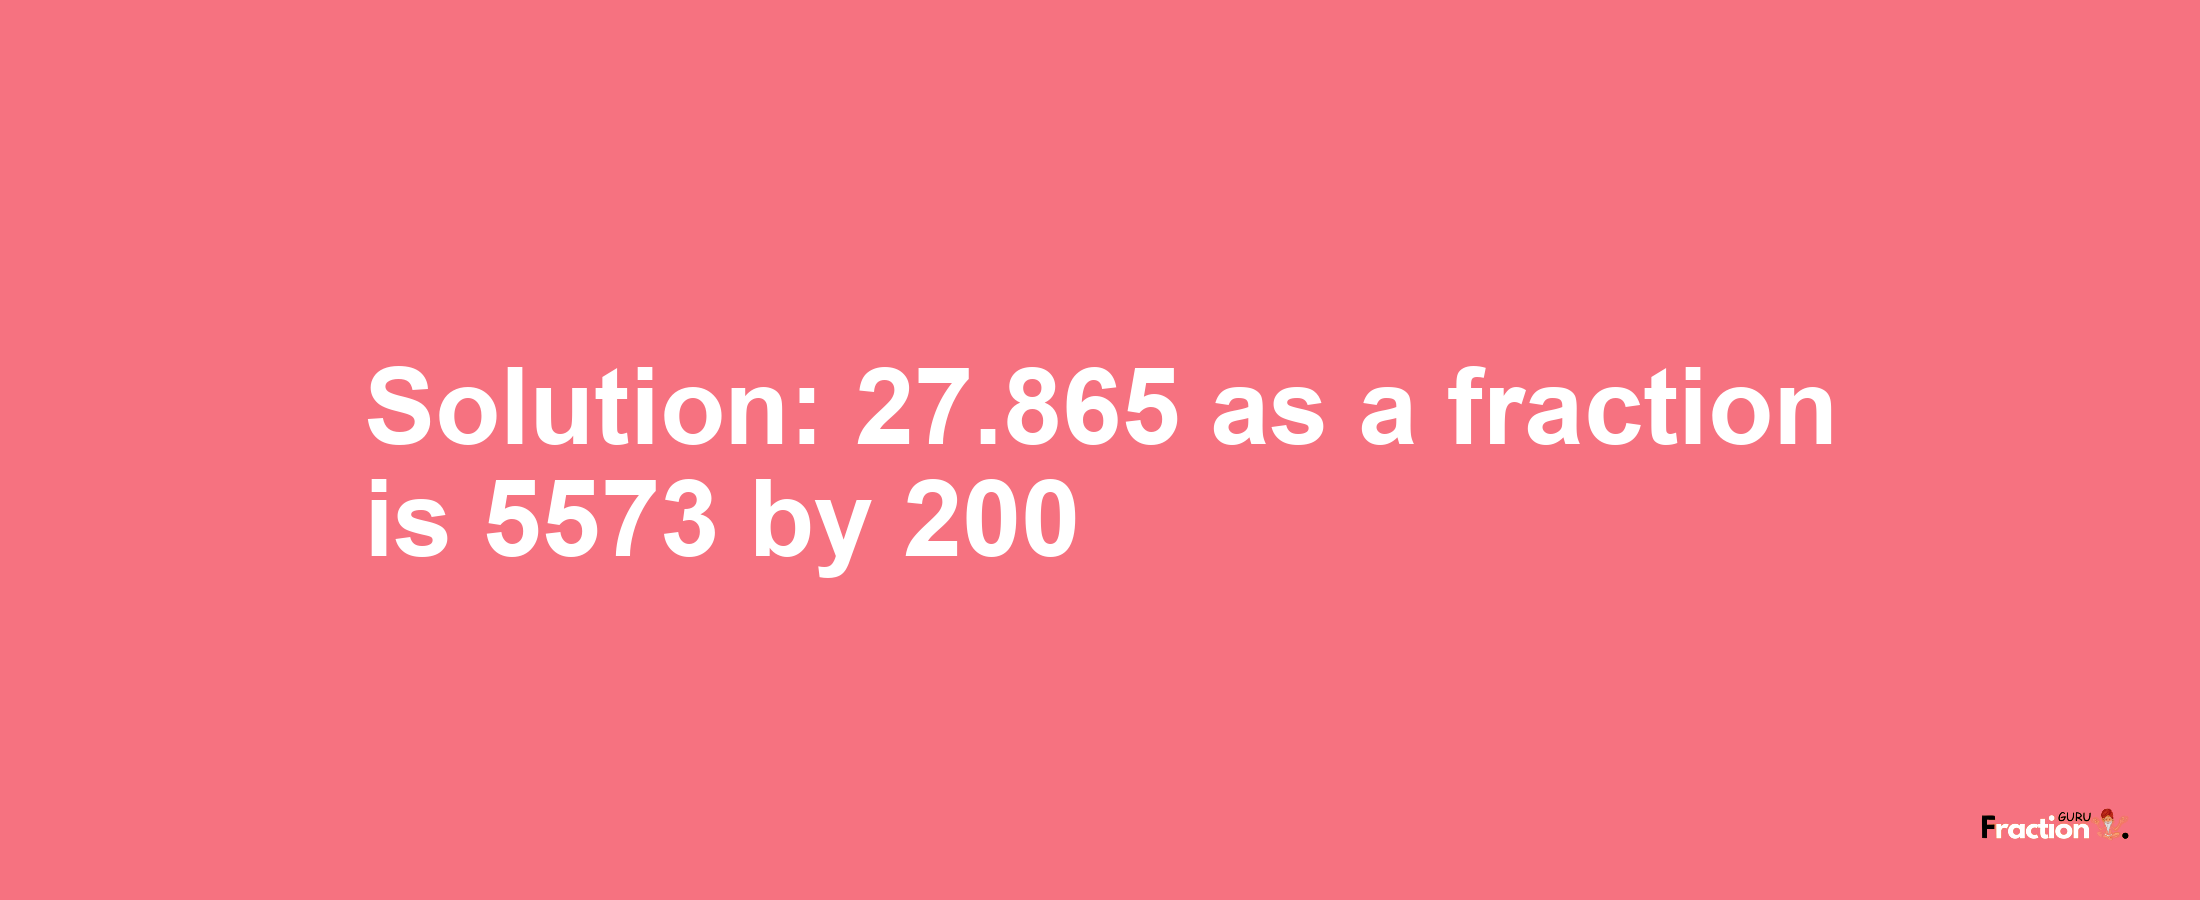 Solution:27.865 as a fraction is 5573/200